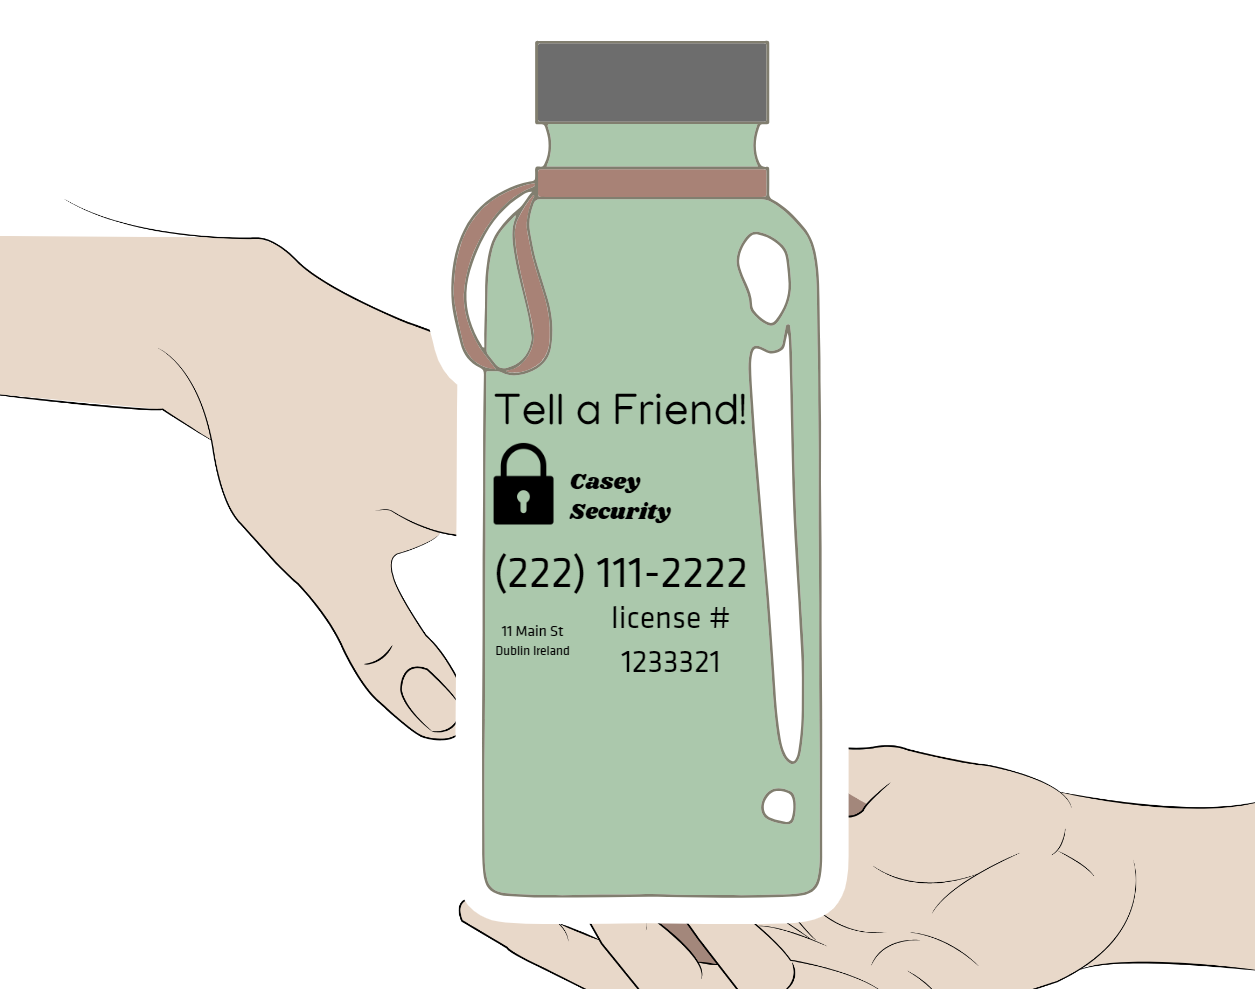 Stainless steel water bottle with business branding